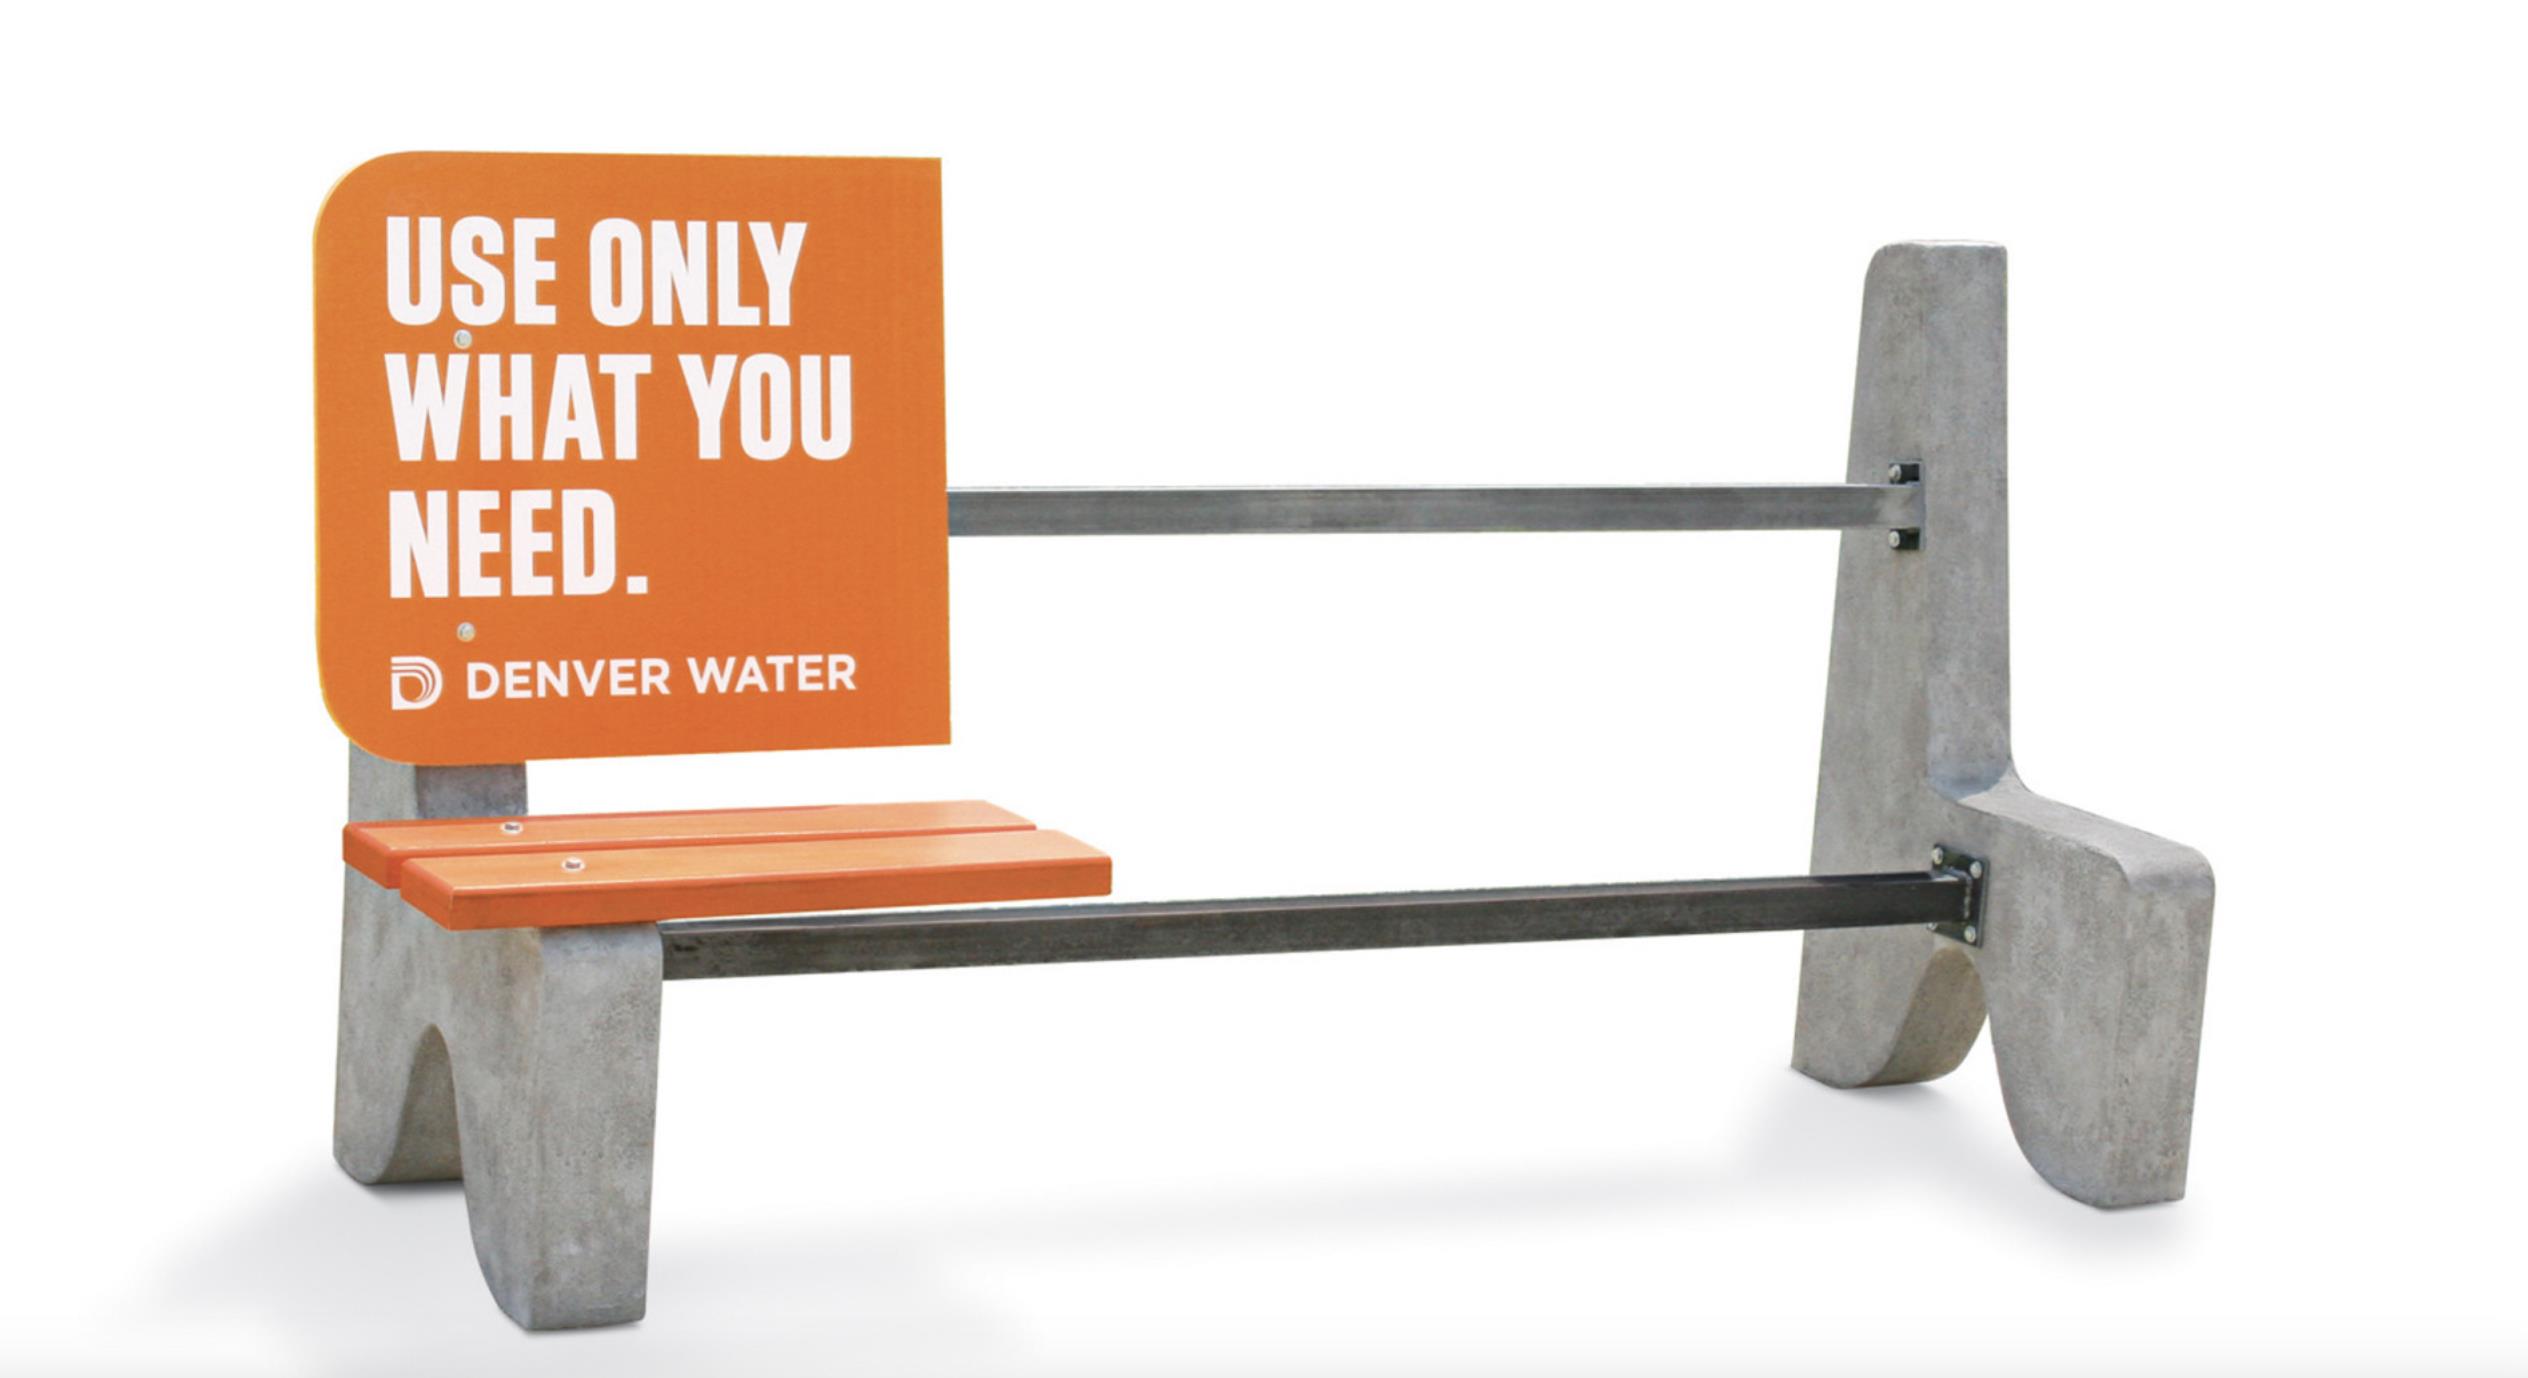 Denver Water - Use Only What You Need